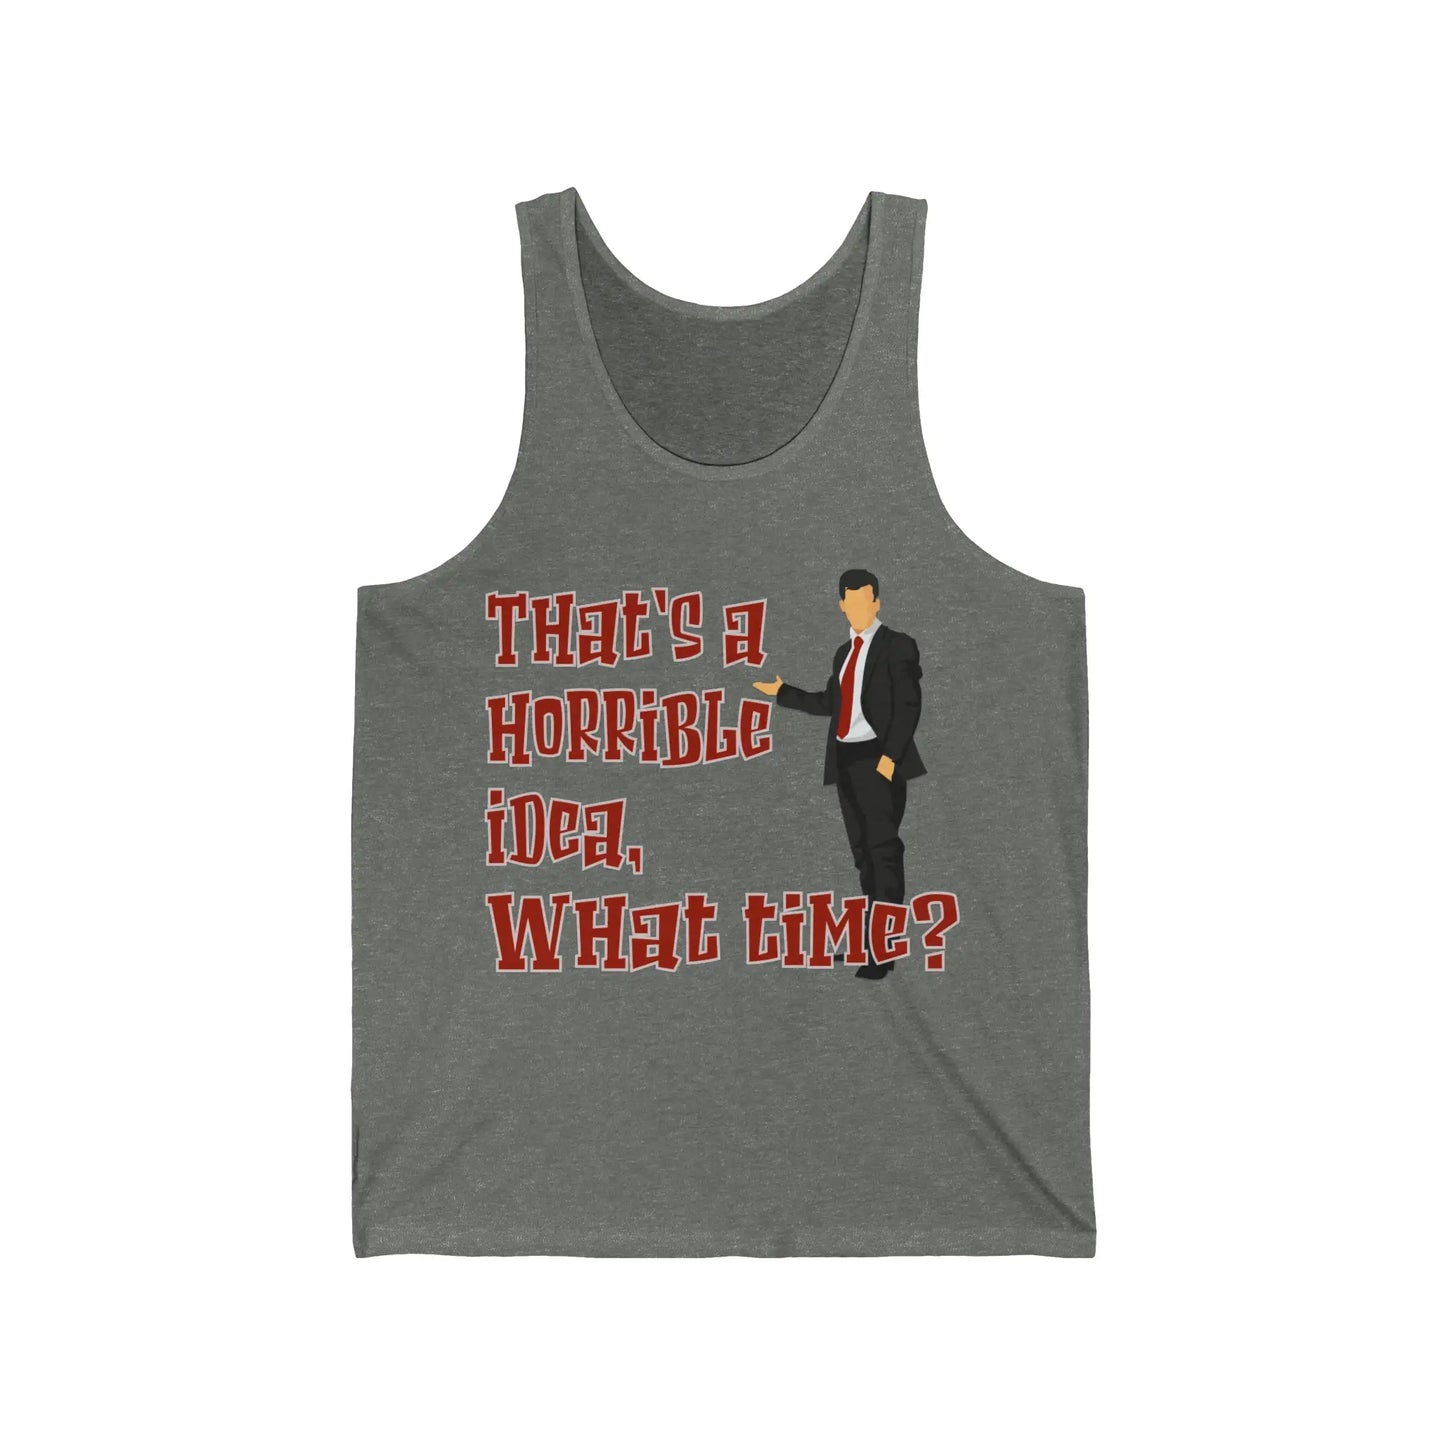 That's A Horrible Idea What Time Men's Tank - Wicked Tees